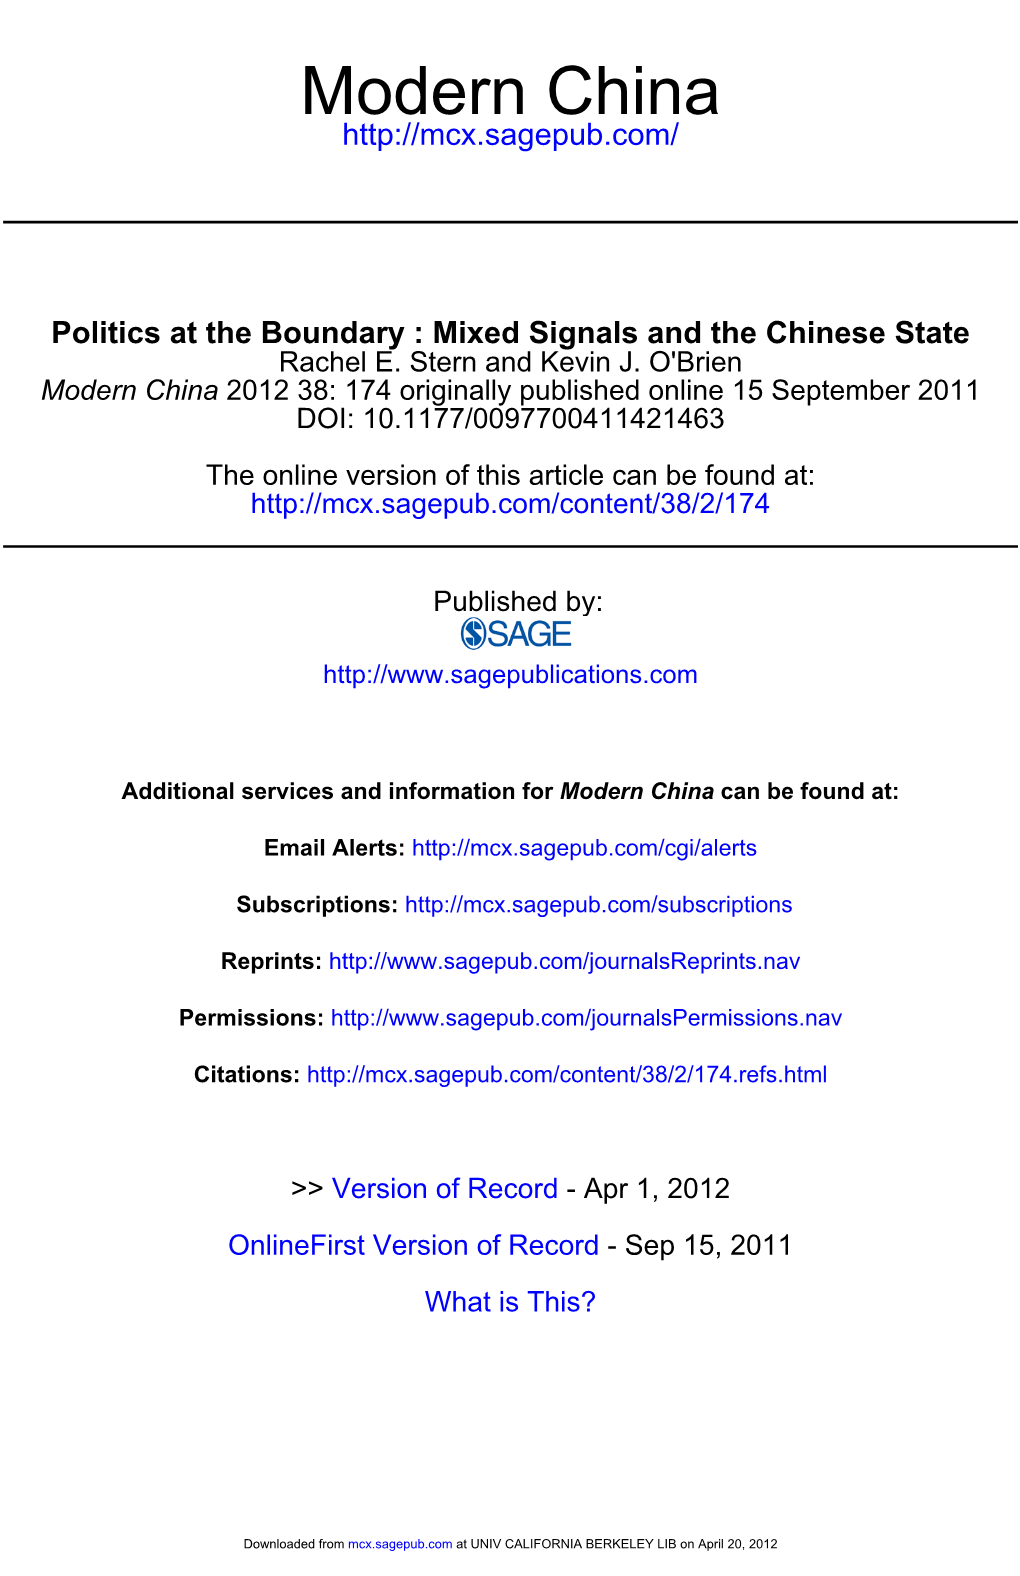 Modern China (2012) -- "Politics at the Boundary: Mixed Signals and the Chinese State"